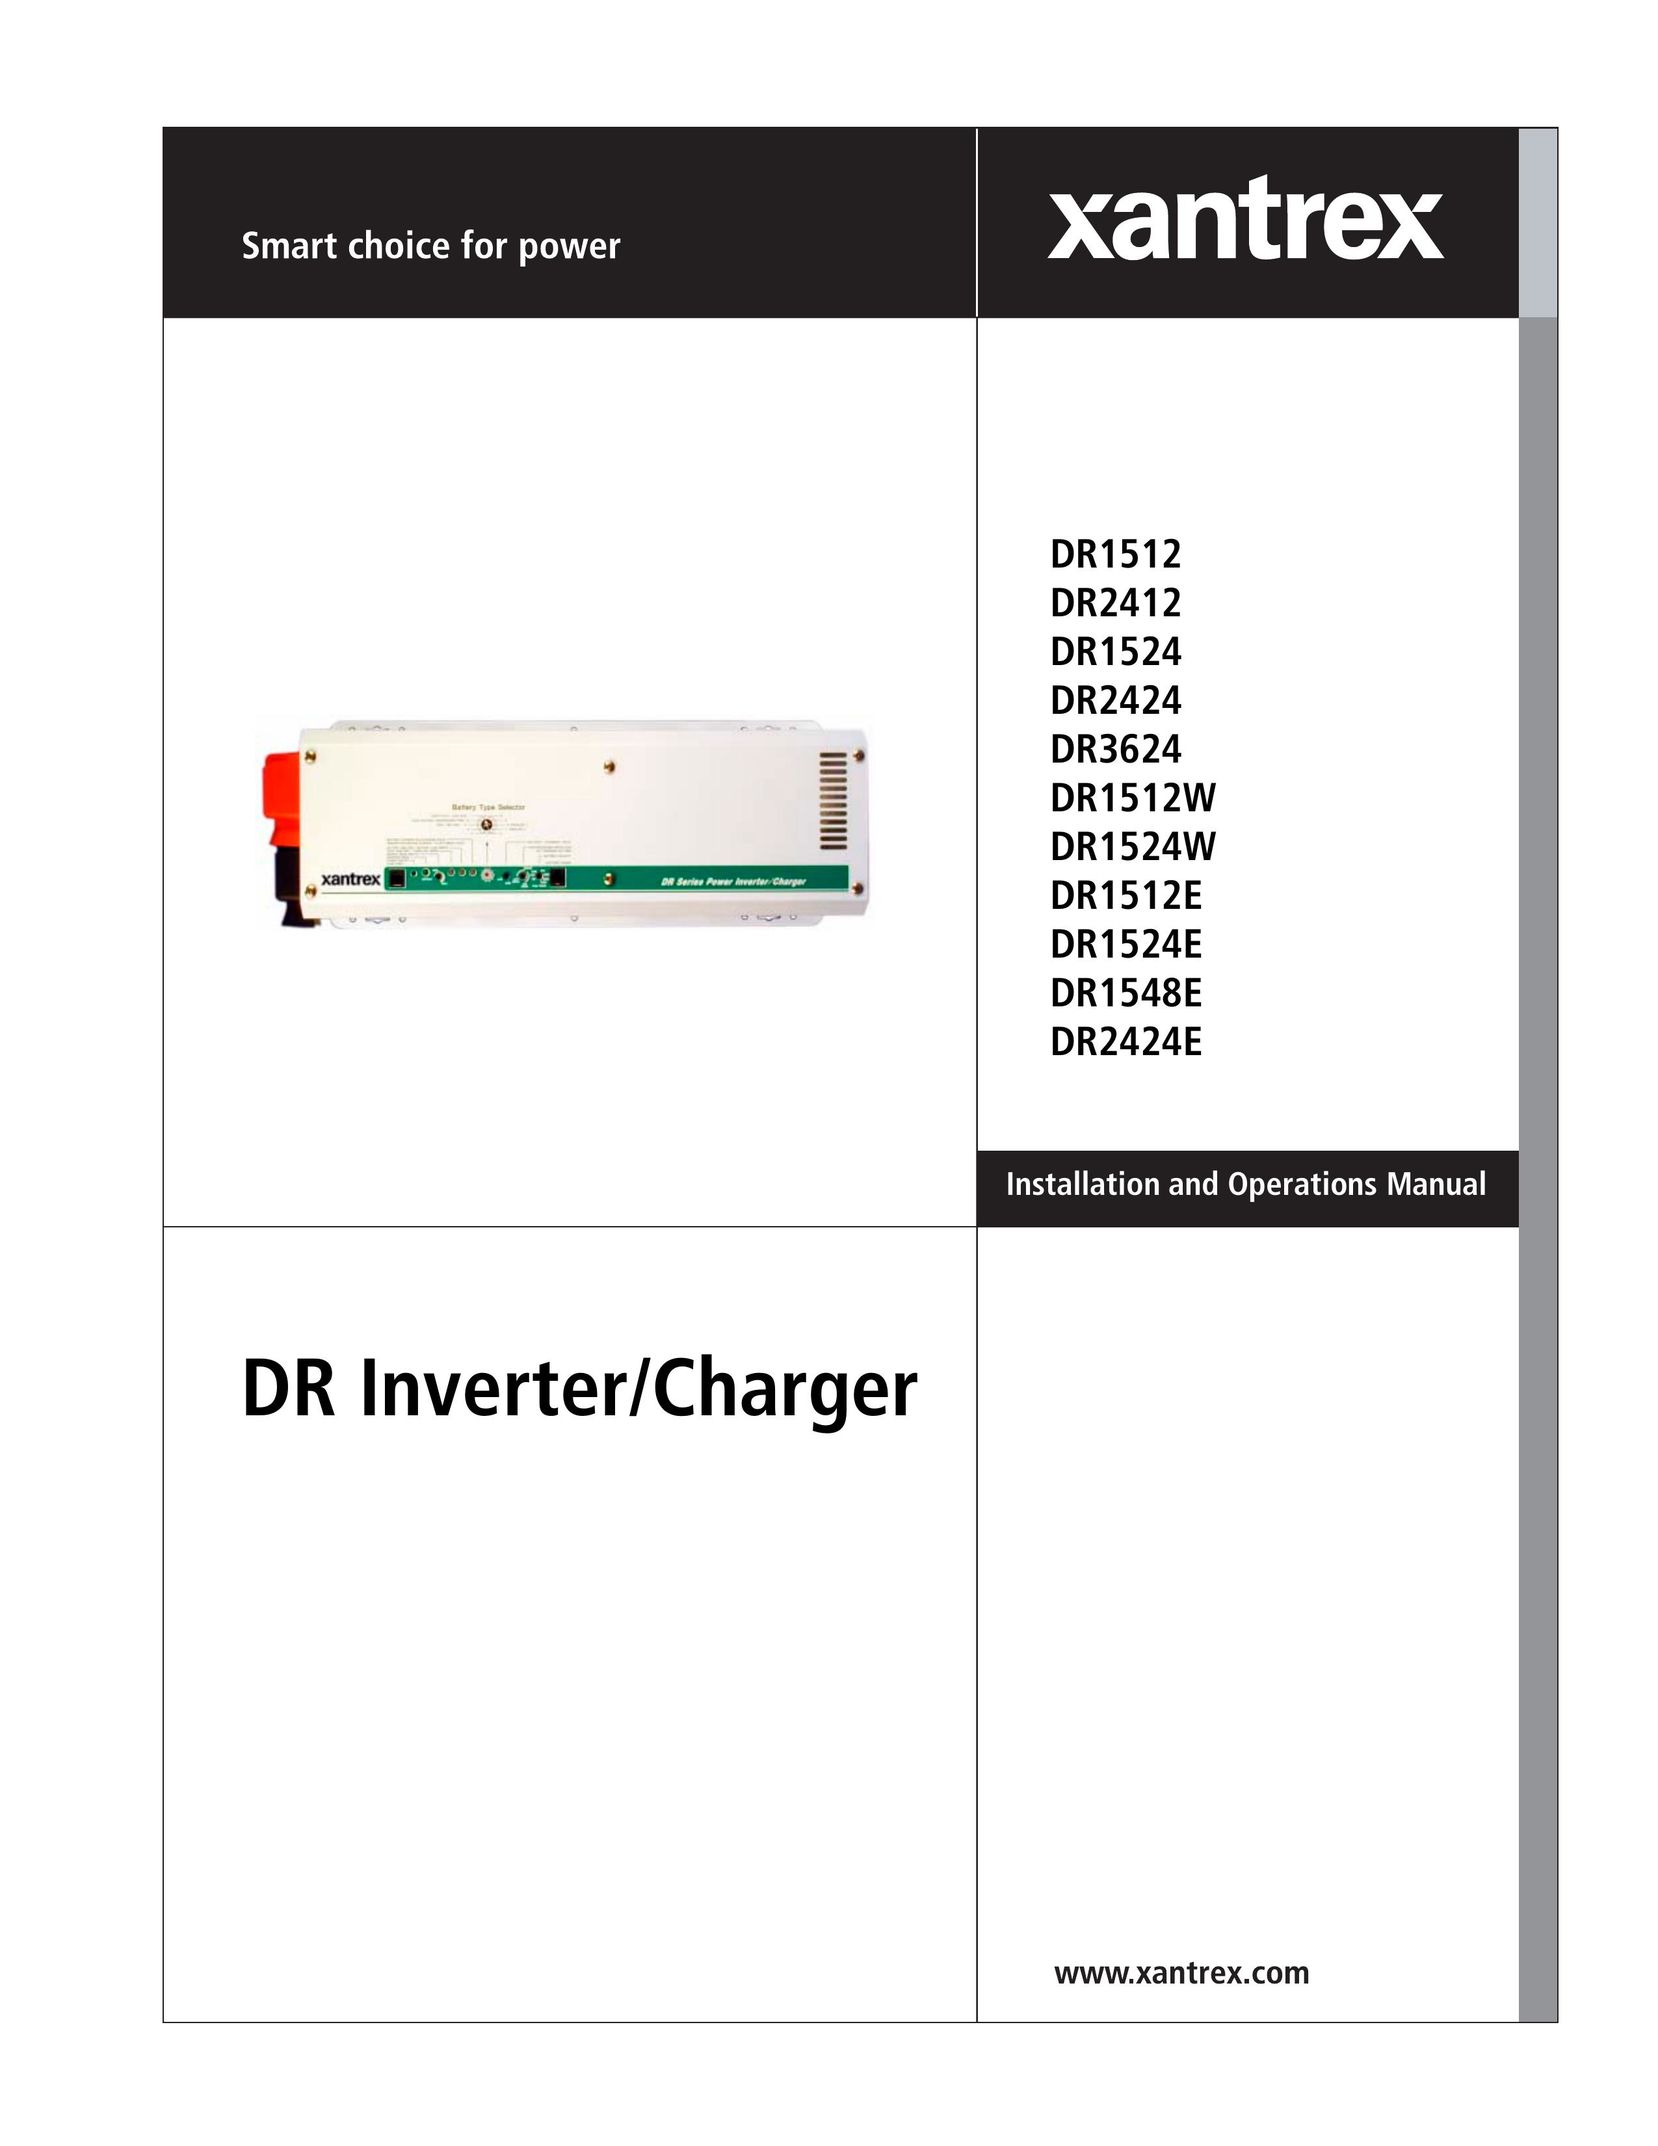 Xantrex Technology DR1524W Battery Charger User Manual